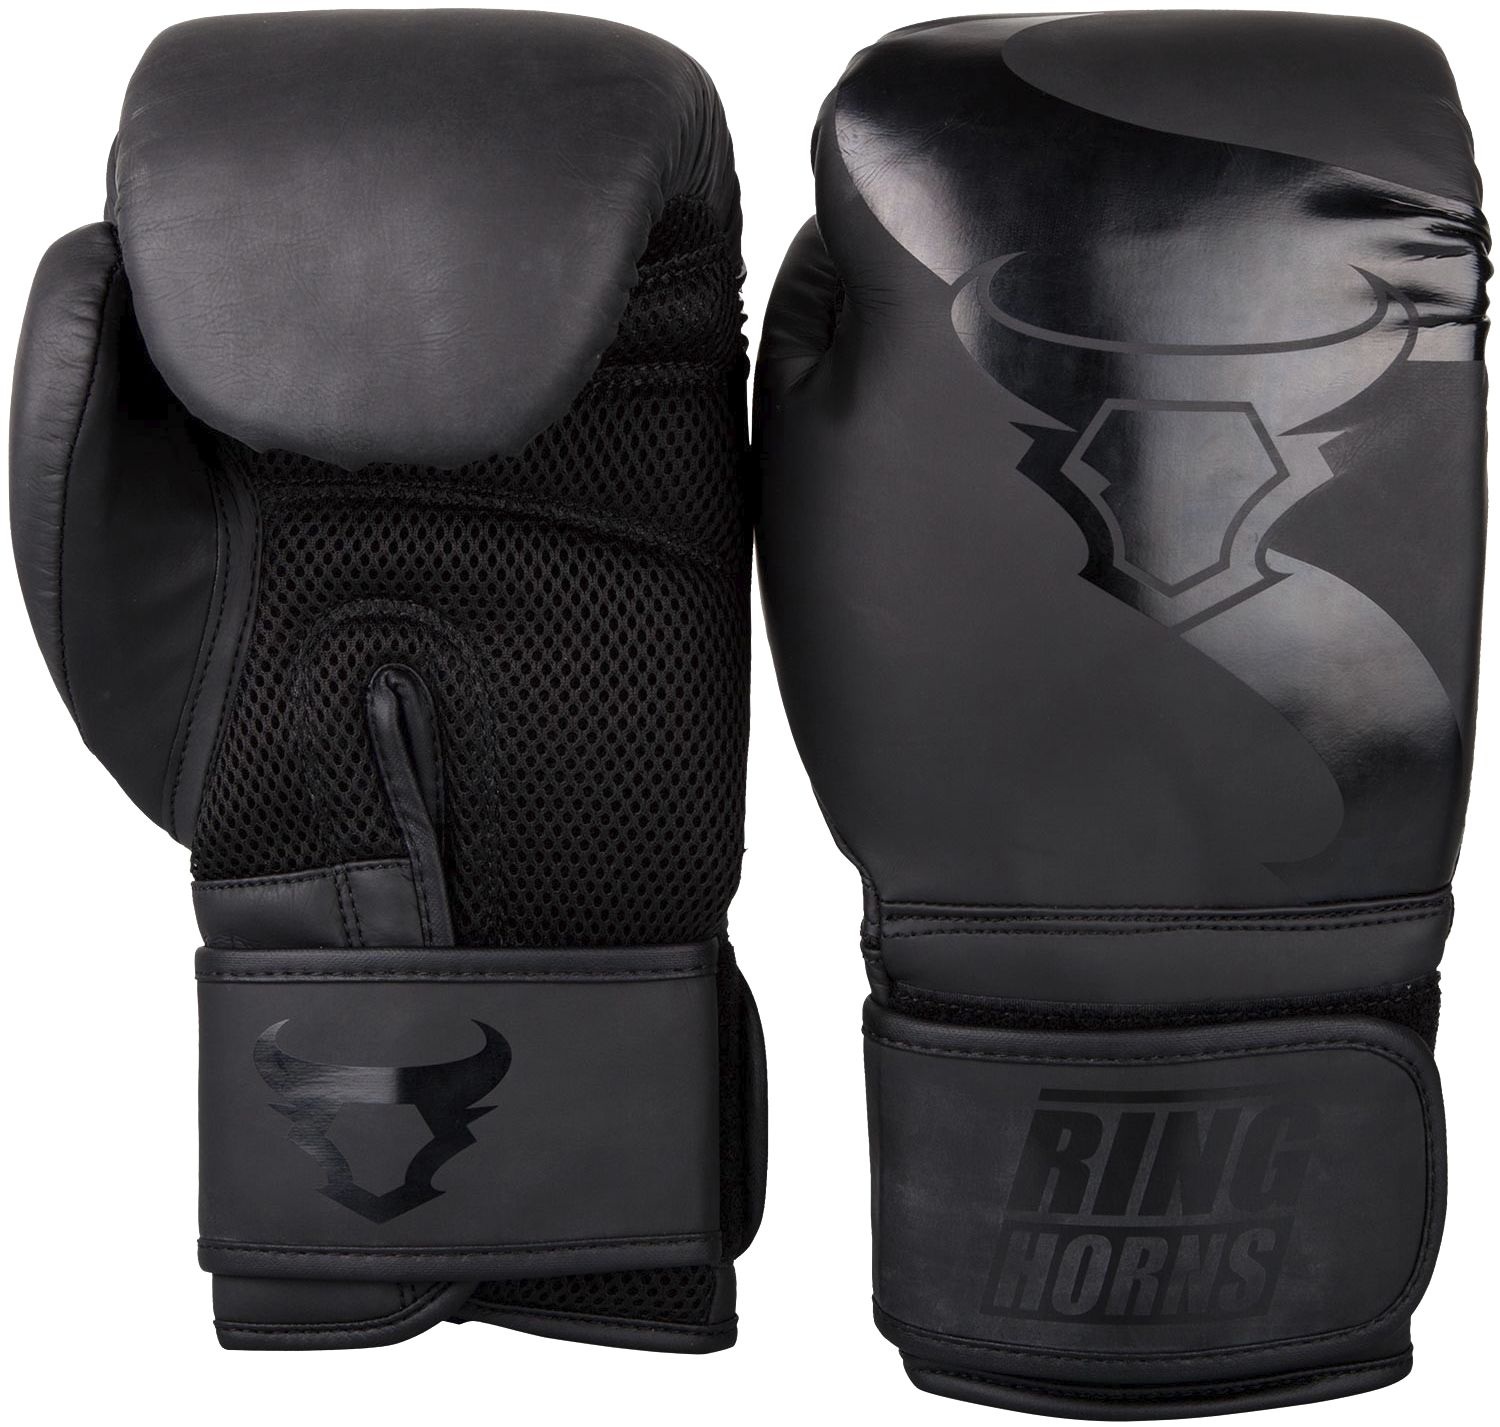 RINGHORNS, CHARGER BOXING GLOVES